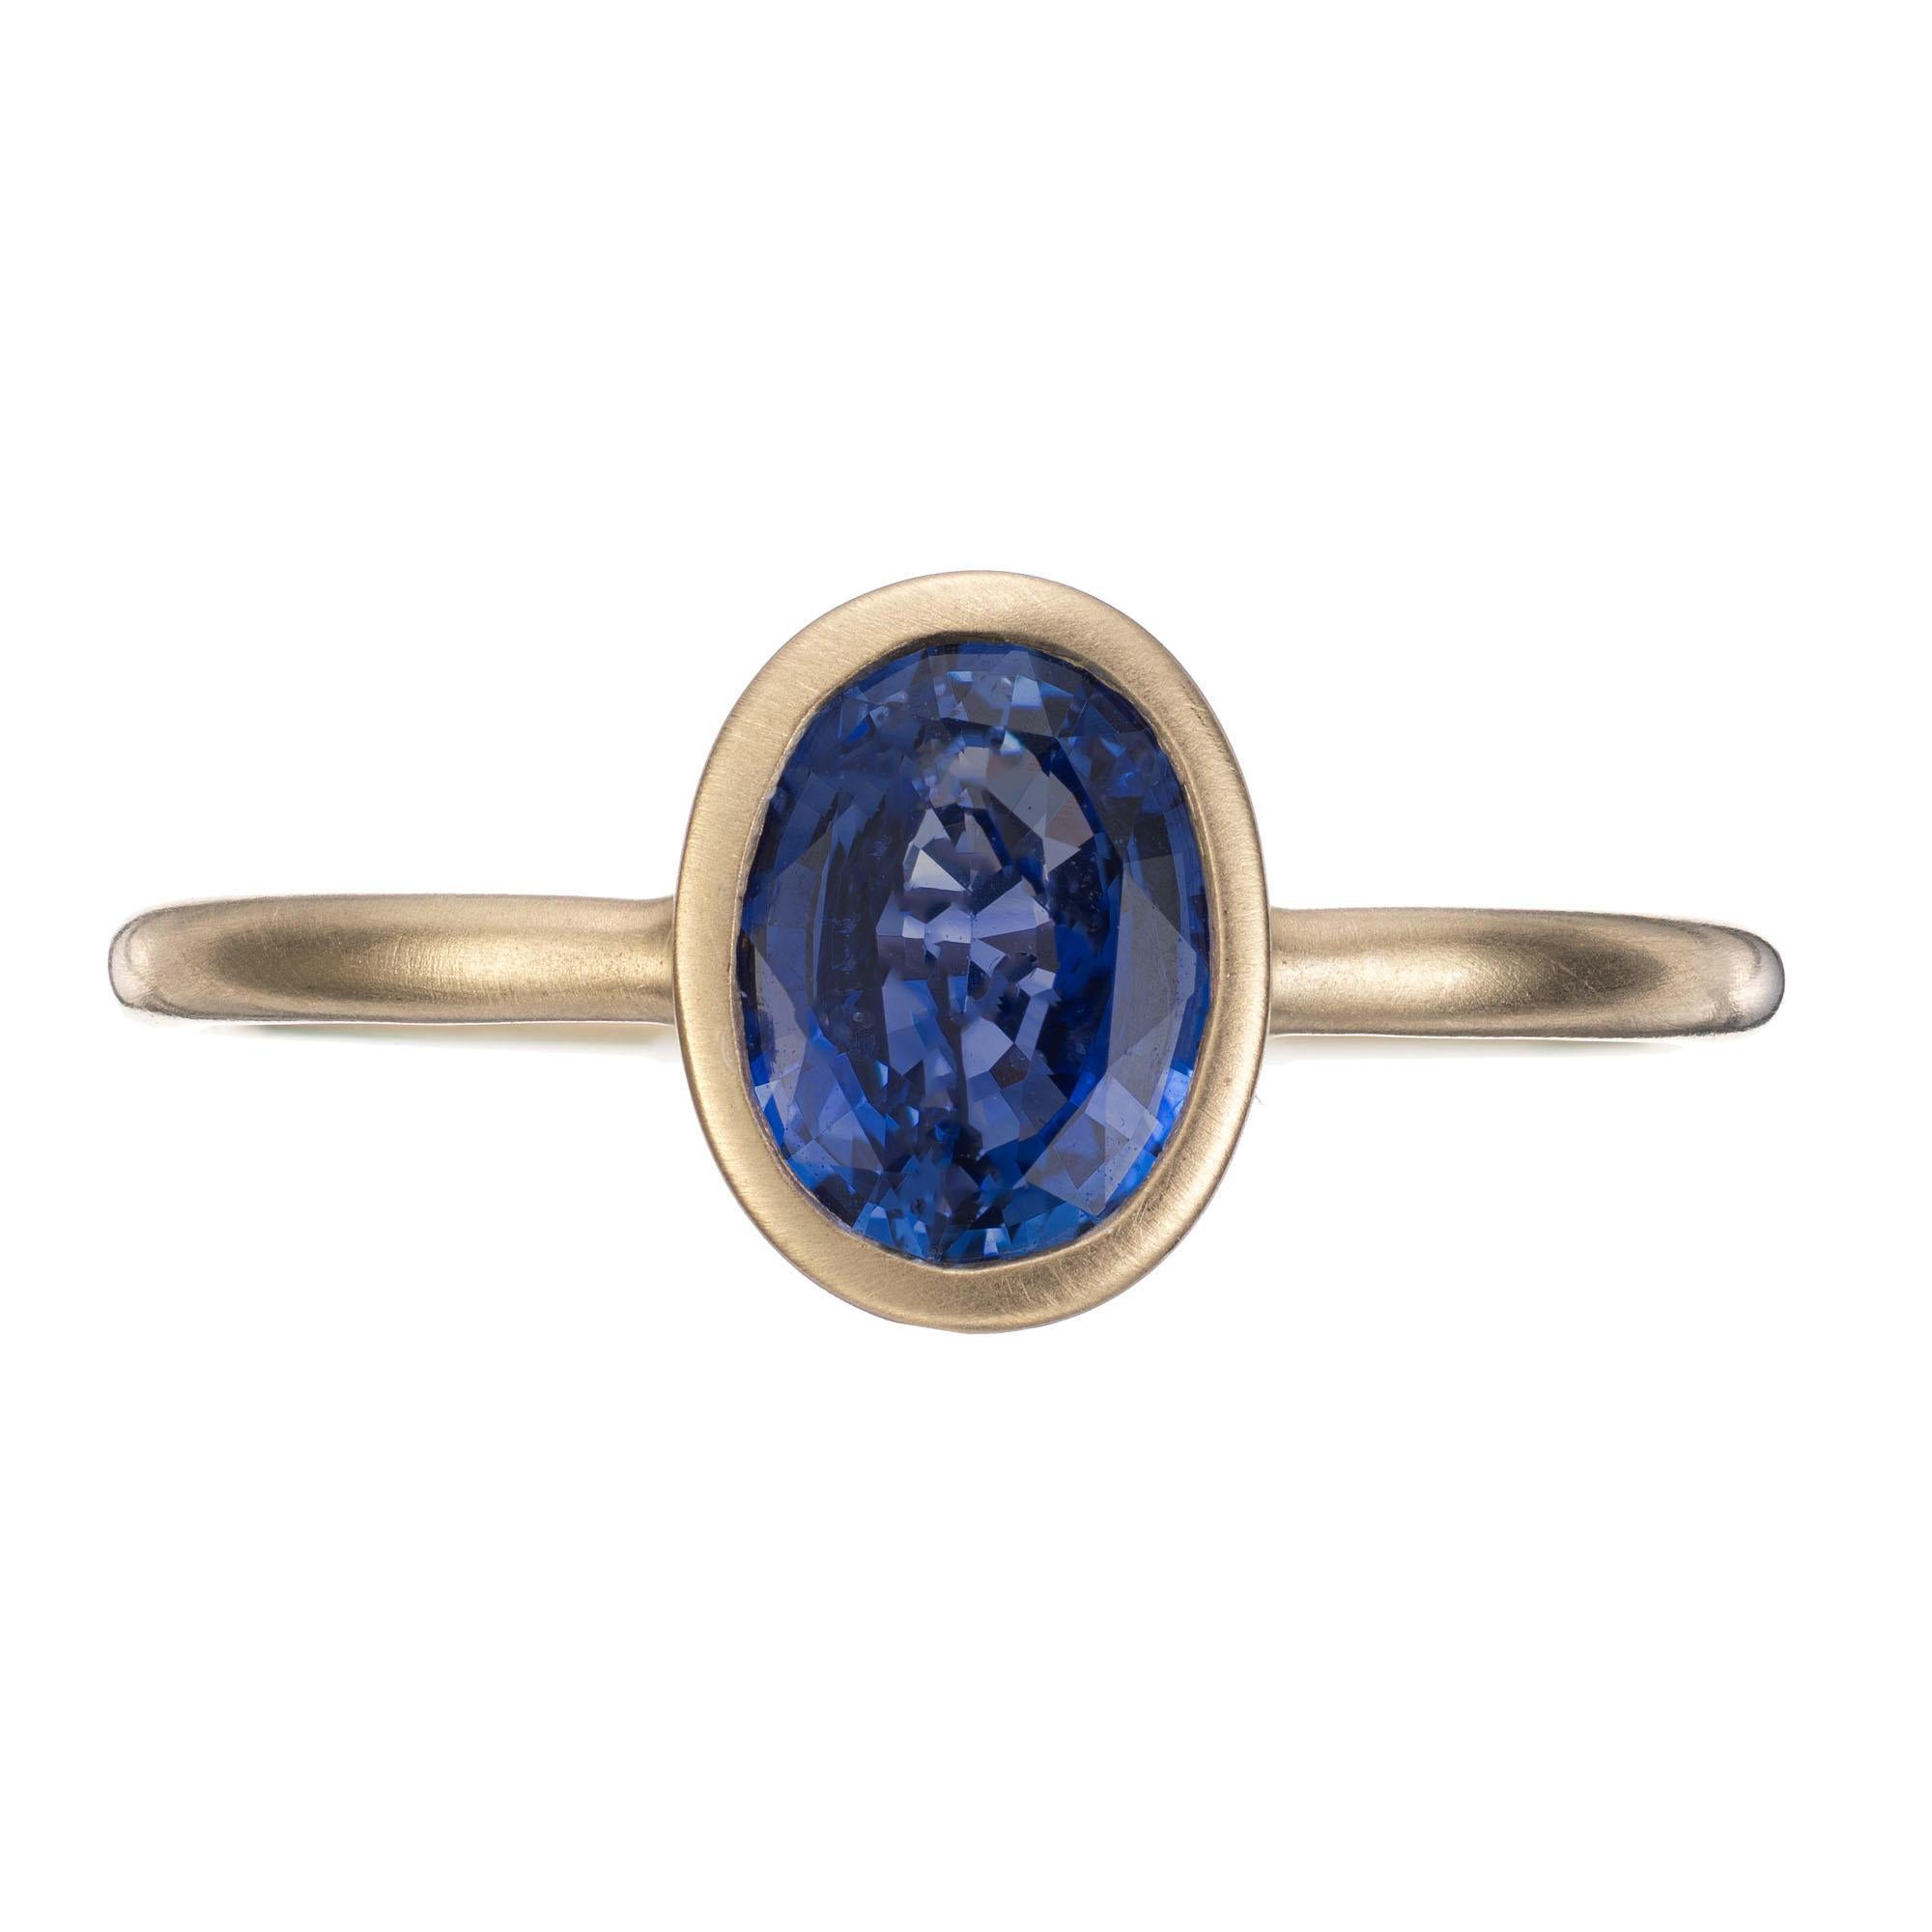 Simple oval Ceylon sapphire solitaire engagement ring. GIA certified bezel set 1.05ct center sapphire in a 14k yellow gold handmade matte finish setting. GIA has certified the sapphire as simple heat only. An alternative to the classic engagement